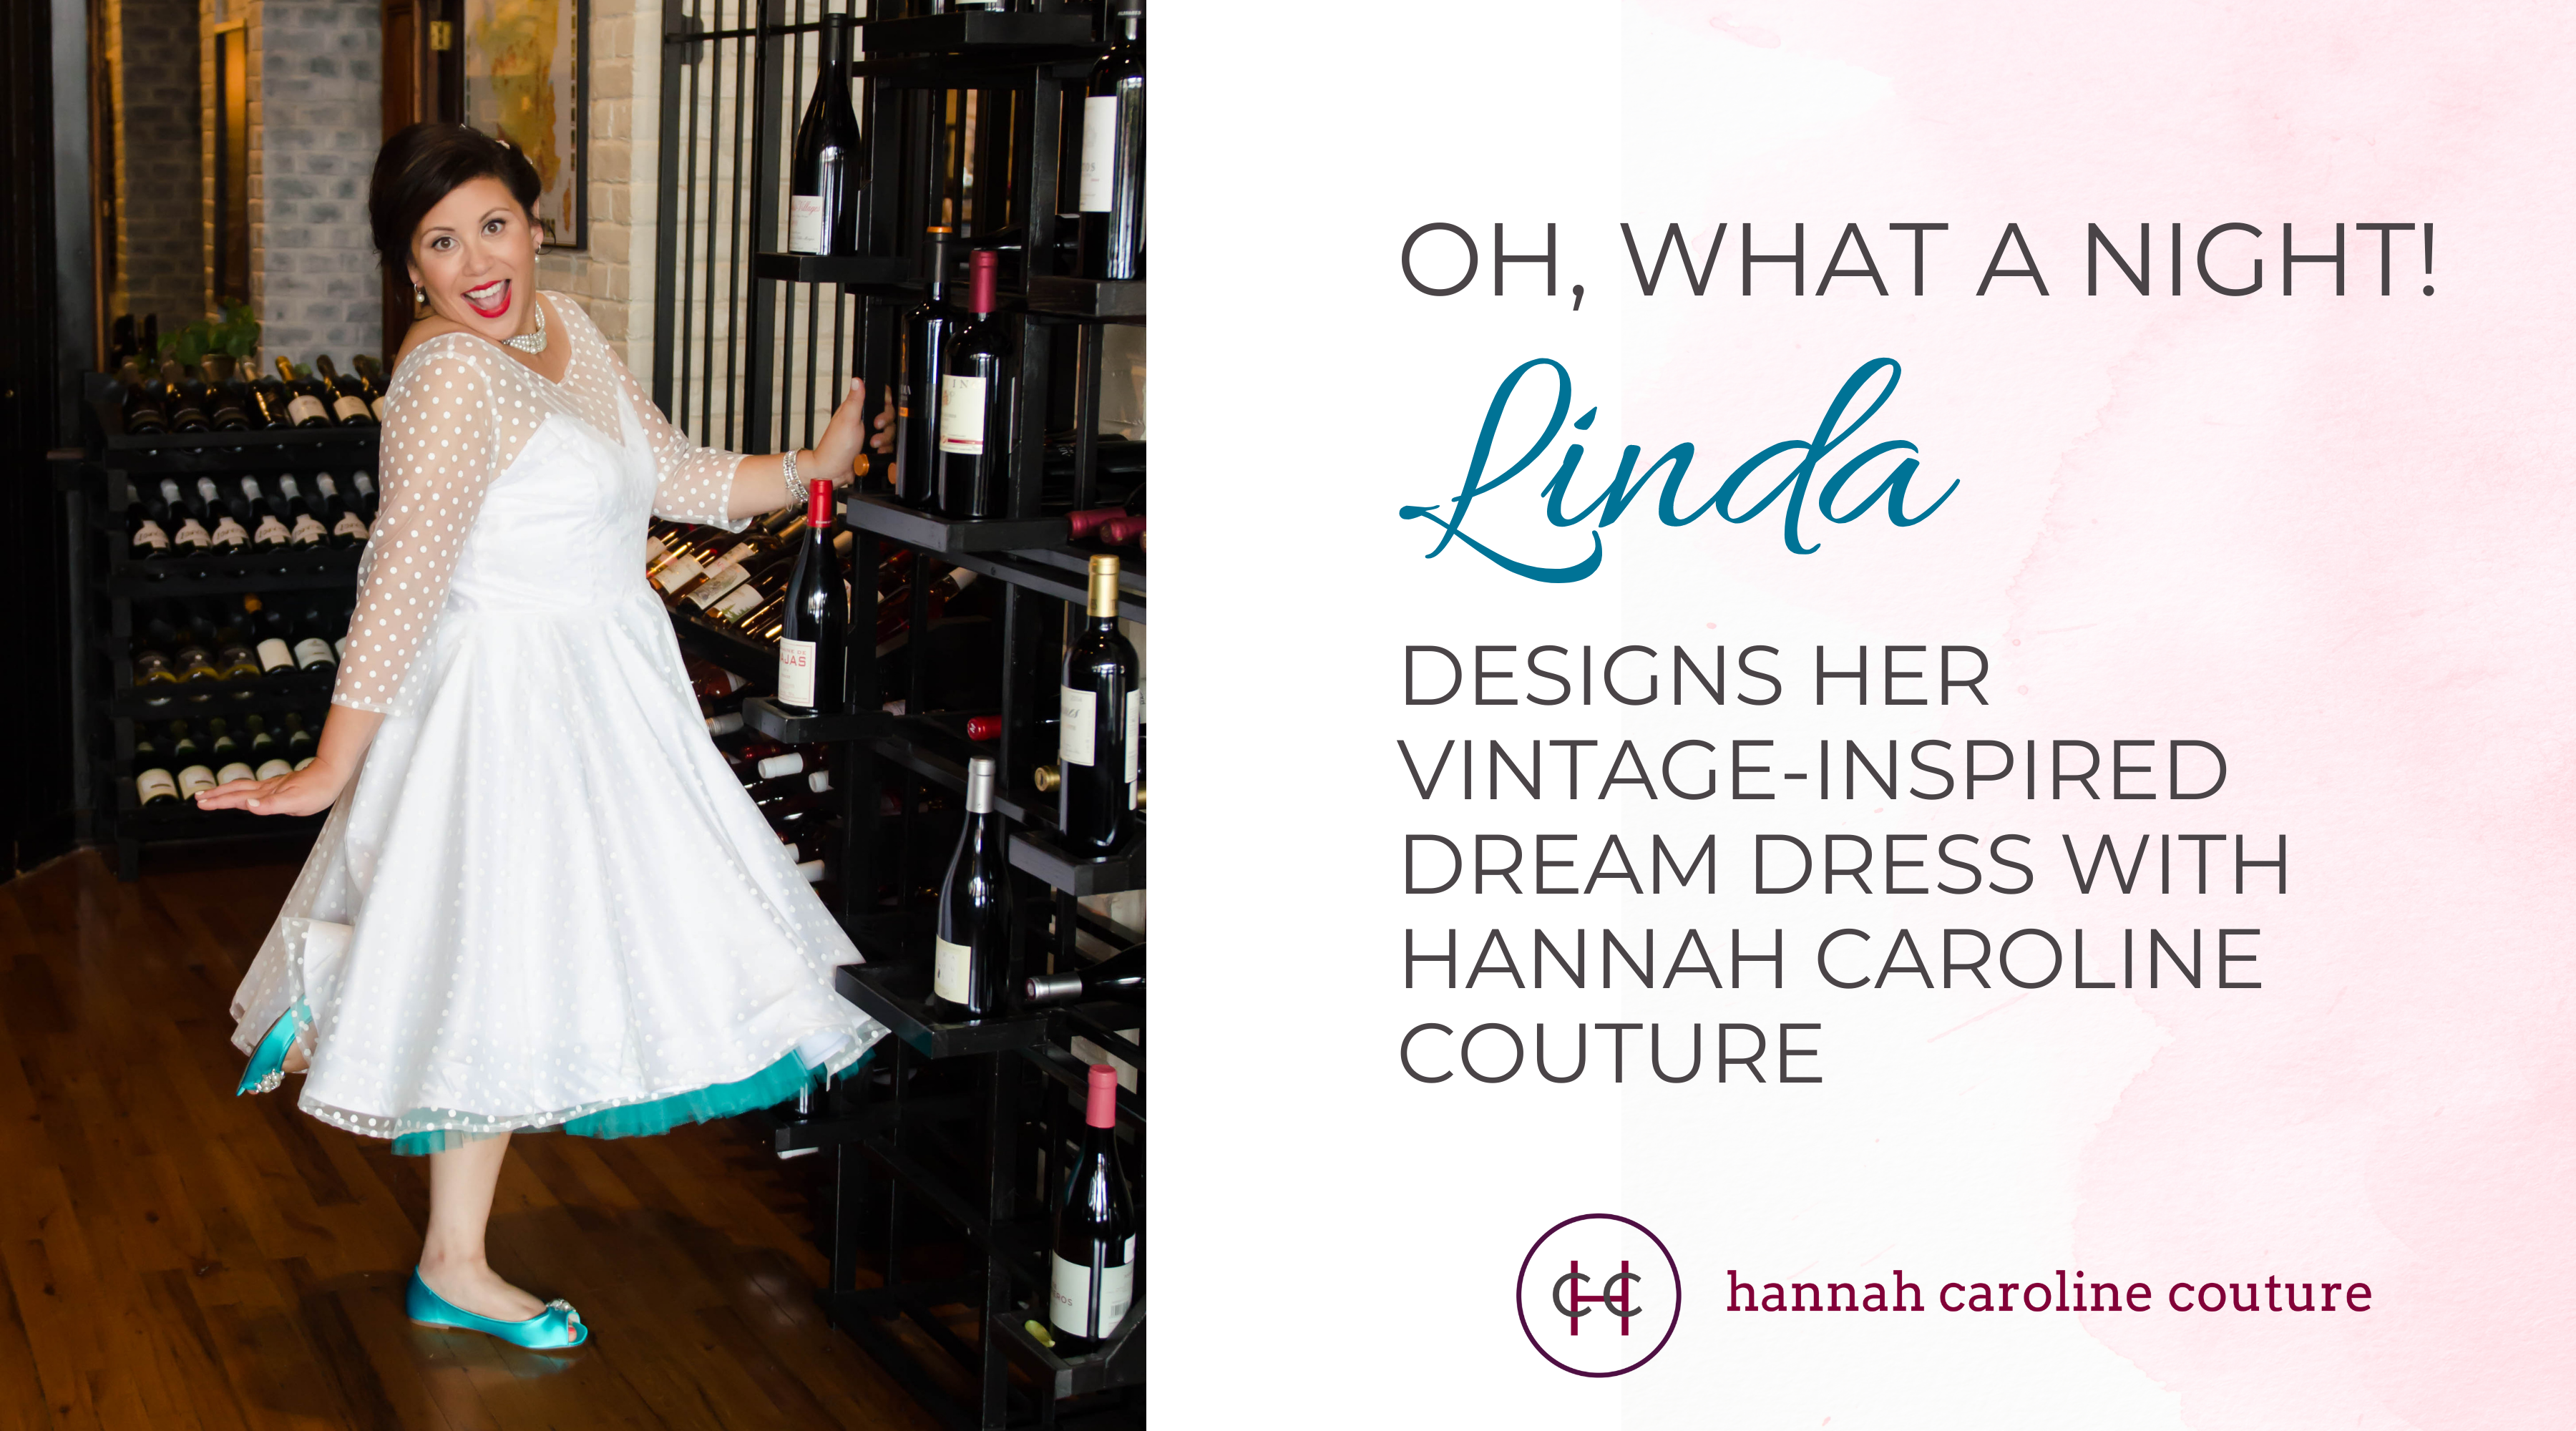 Oh, What a Night! Linda Designs Her Vintage-Inspired Dream Dress with HCC